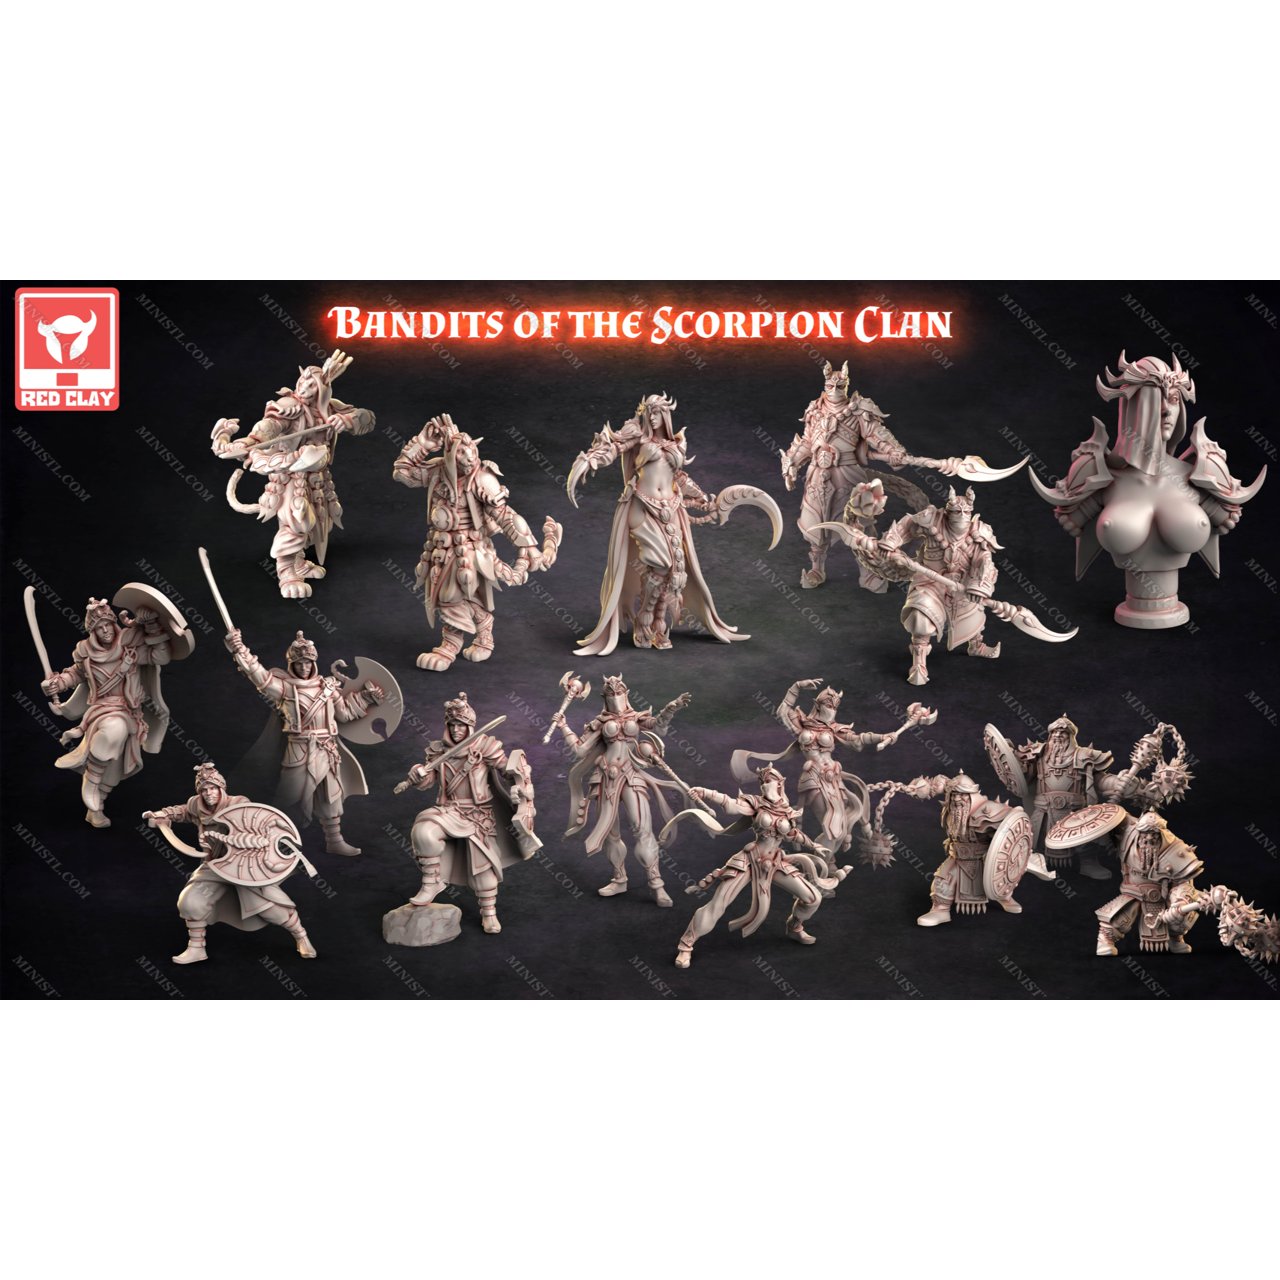 January 2022 (Bandits of the Scorpion Clan) Red Clay Collectibles ...